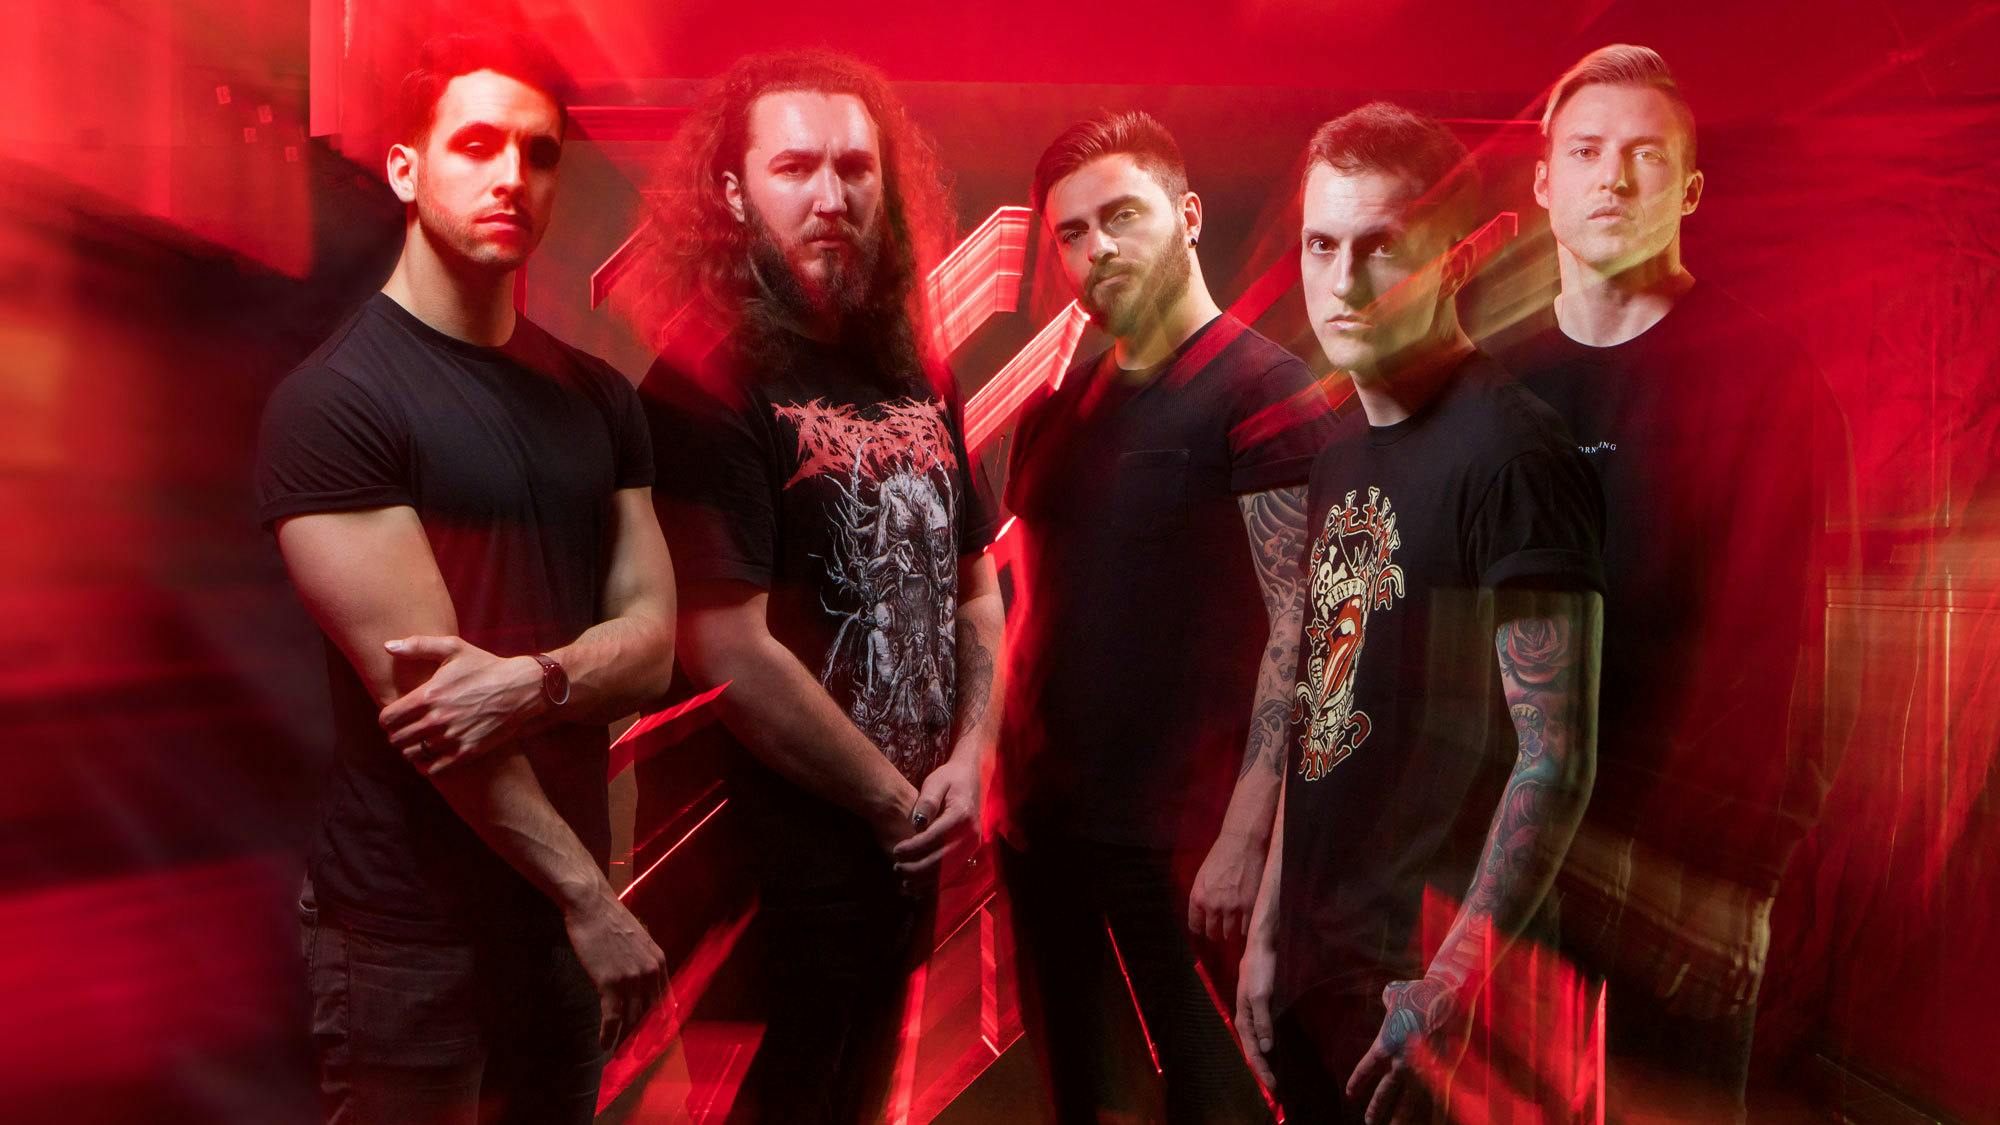 I Prevail Release Two New Videos From New Album Trauma